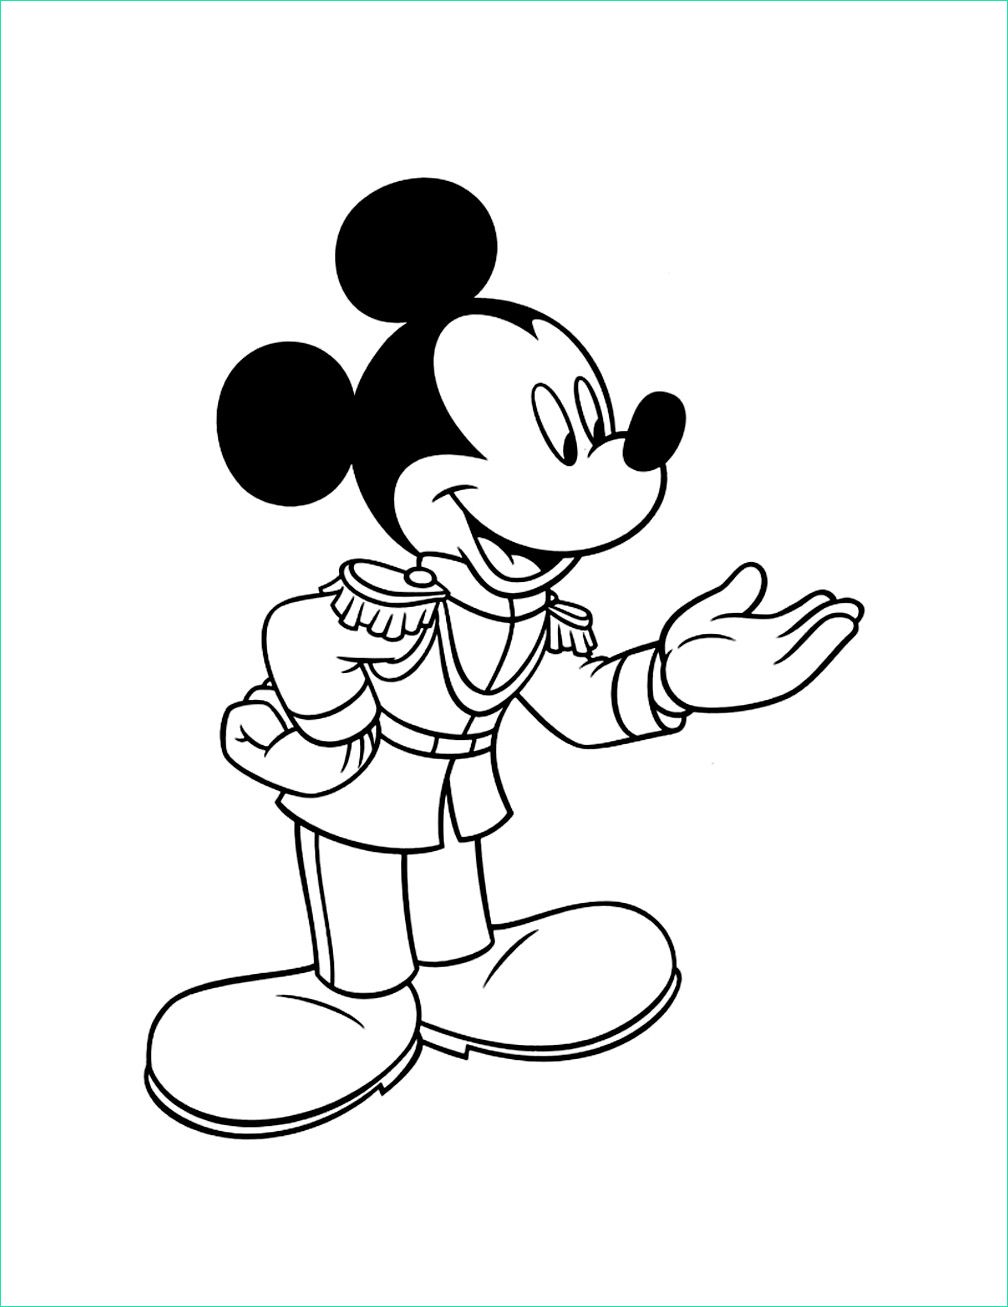 Dessin A Colorier Mickey Nouveau Photos Mickey to Color for Kids Mickey Kids Coloring Pages